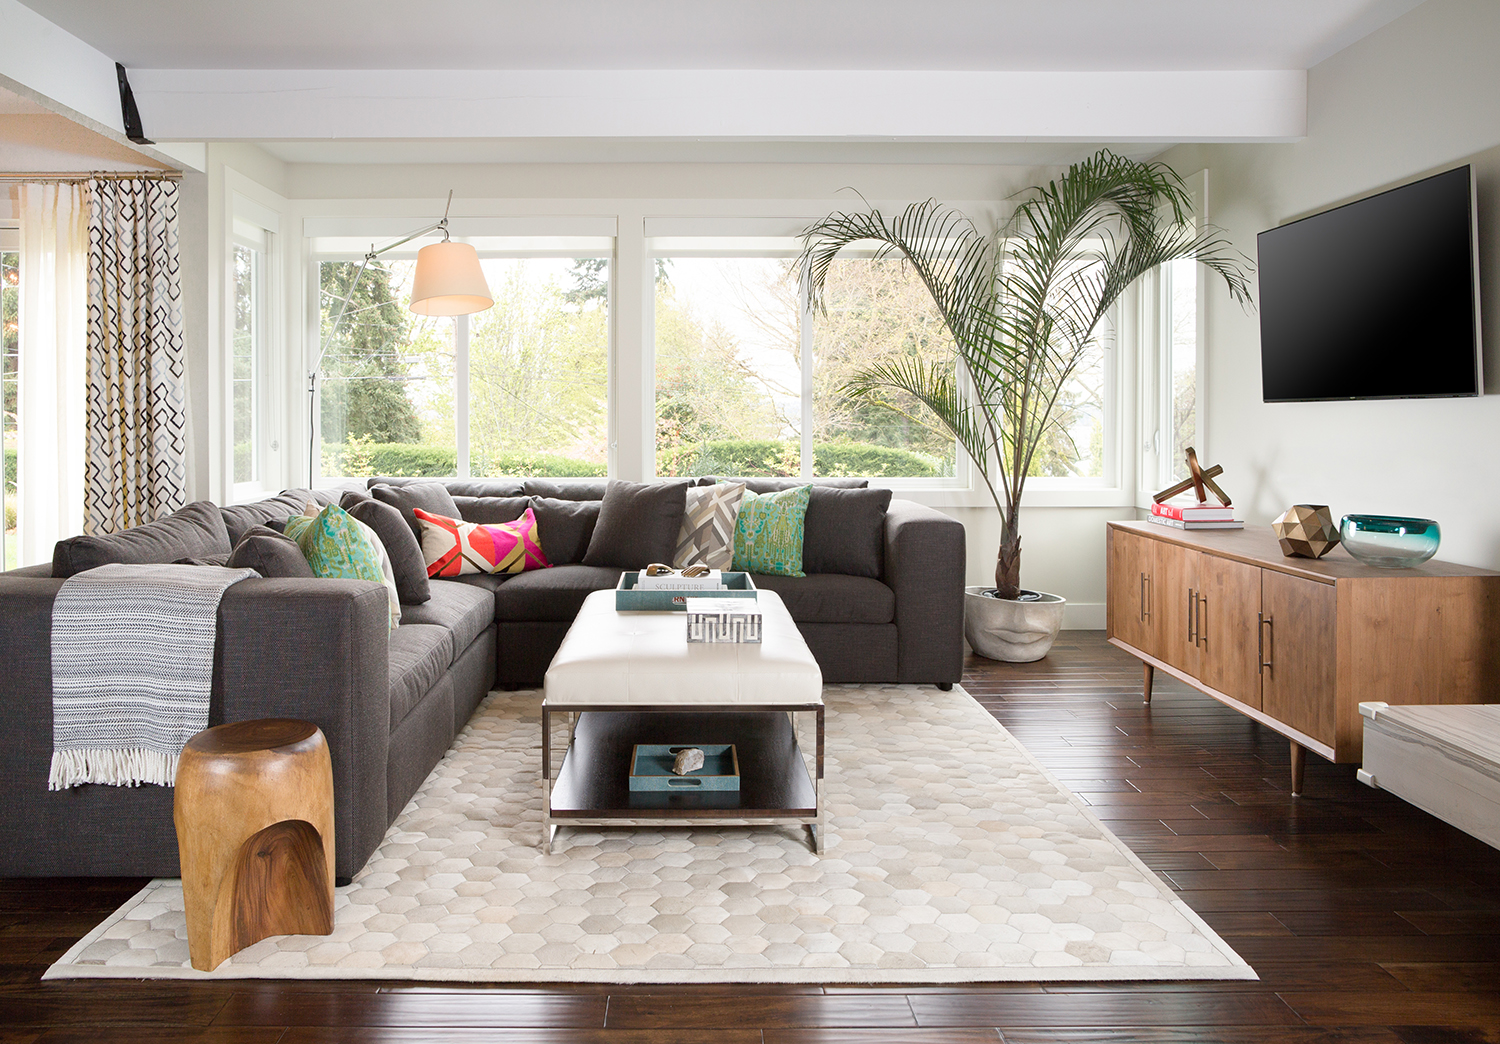 Modern Great Room | personalized livable style | Pulp ...